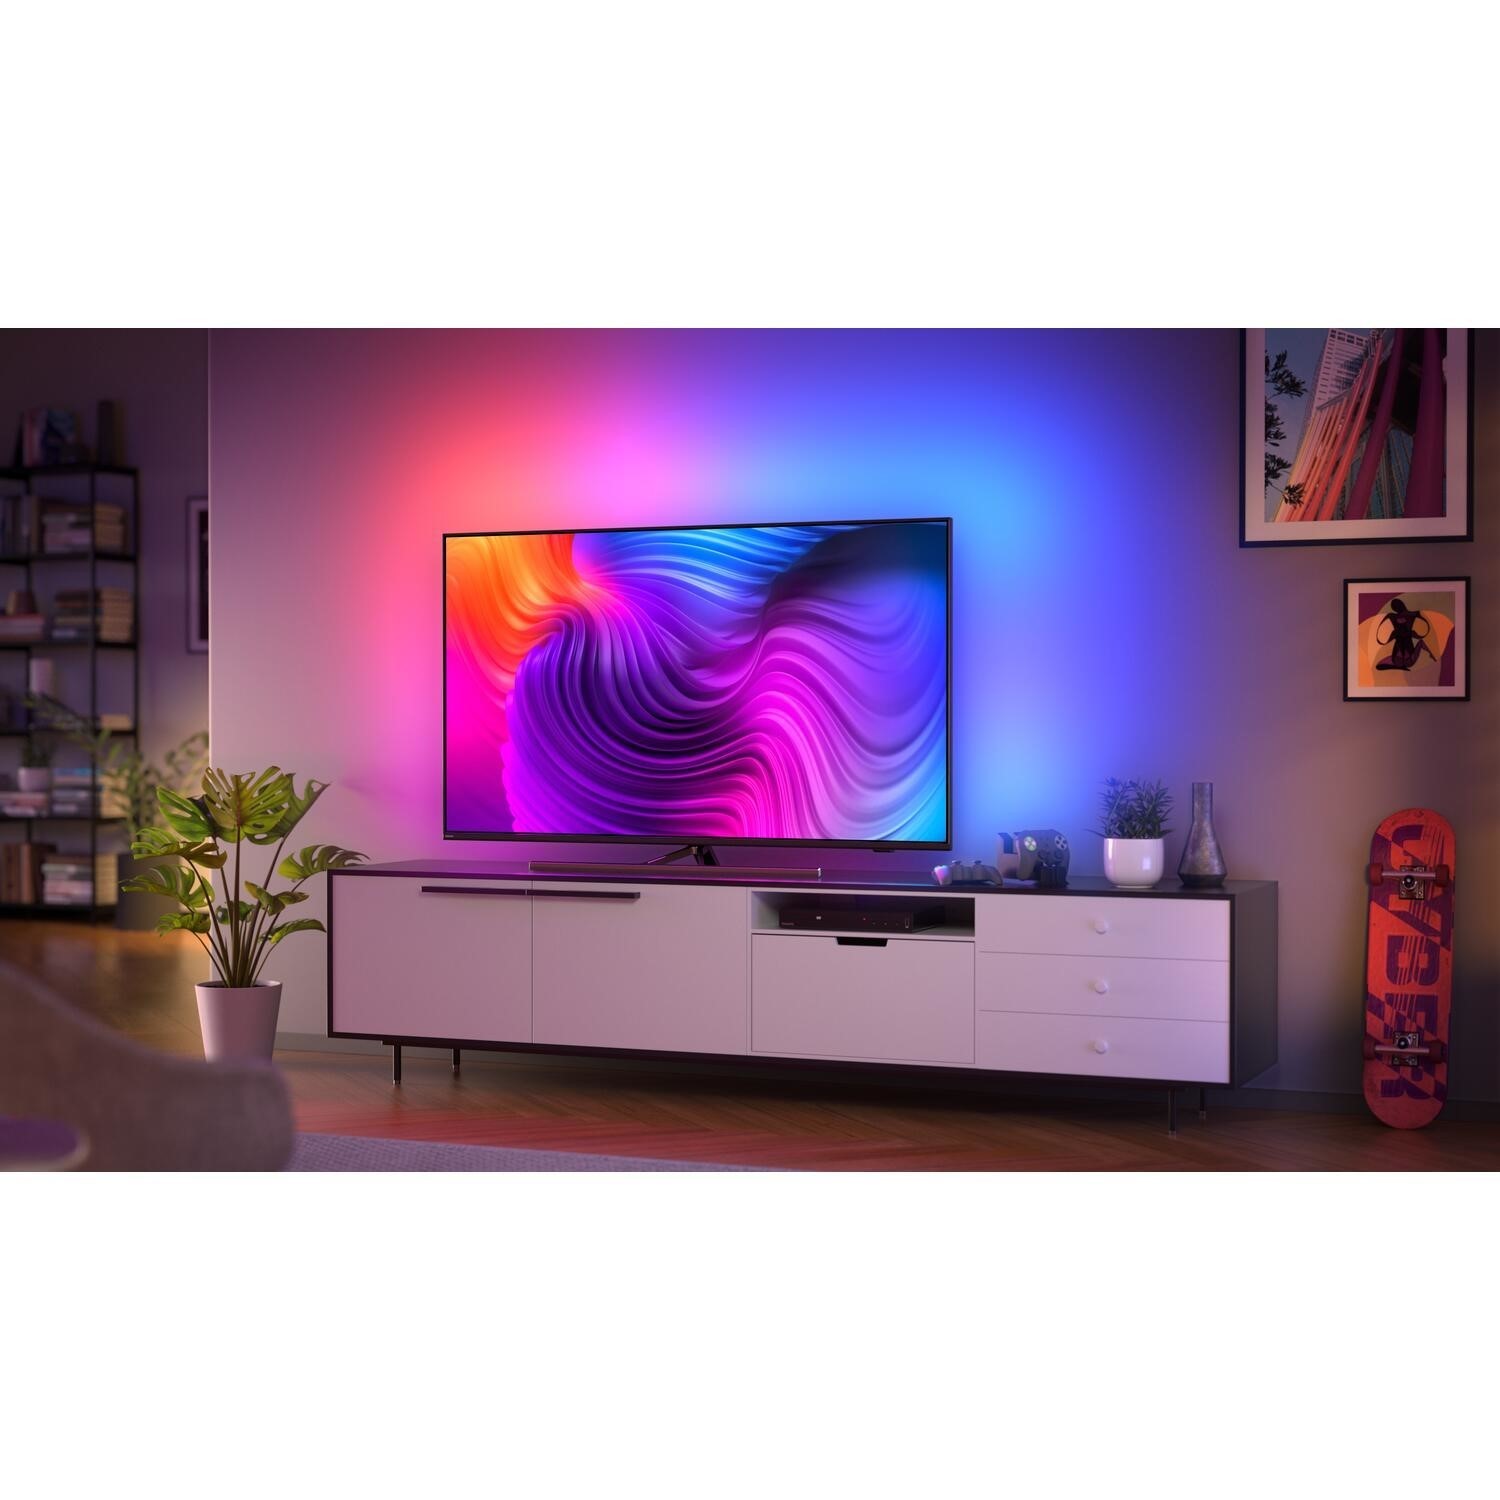 Turn Off The Philips Ambilight And See How Lifeless Your Living